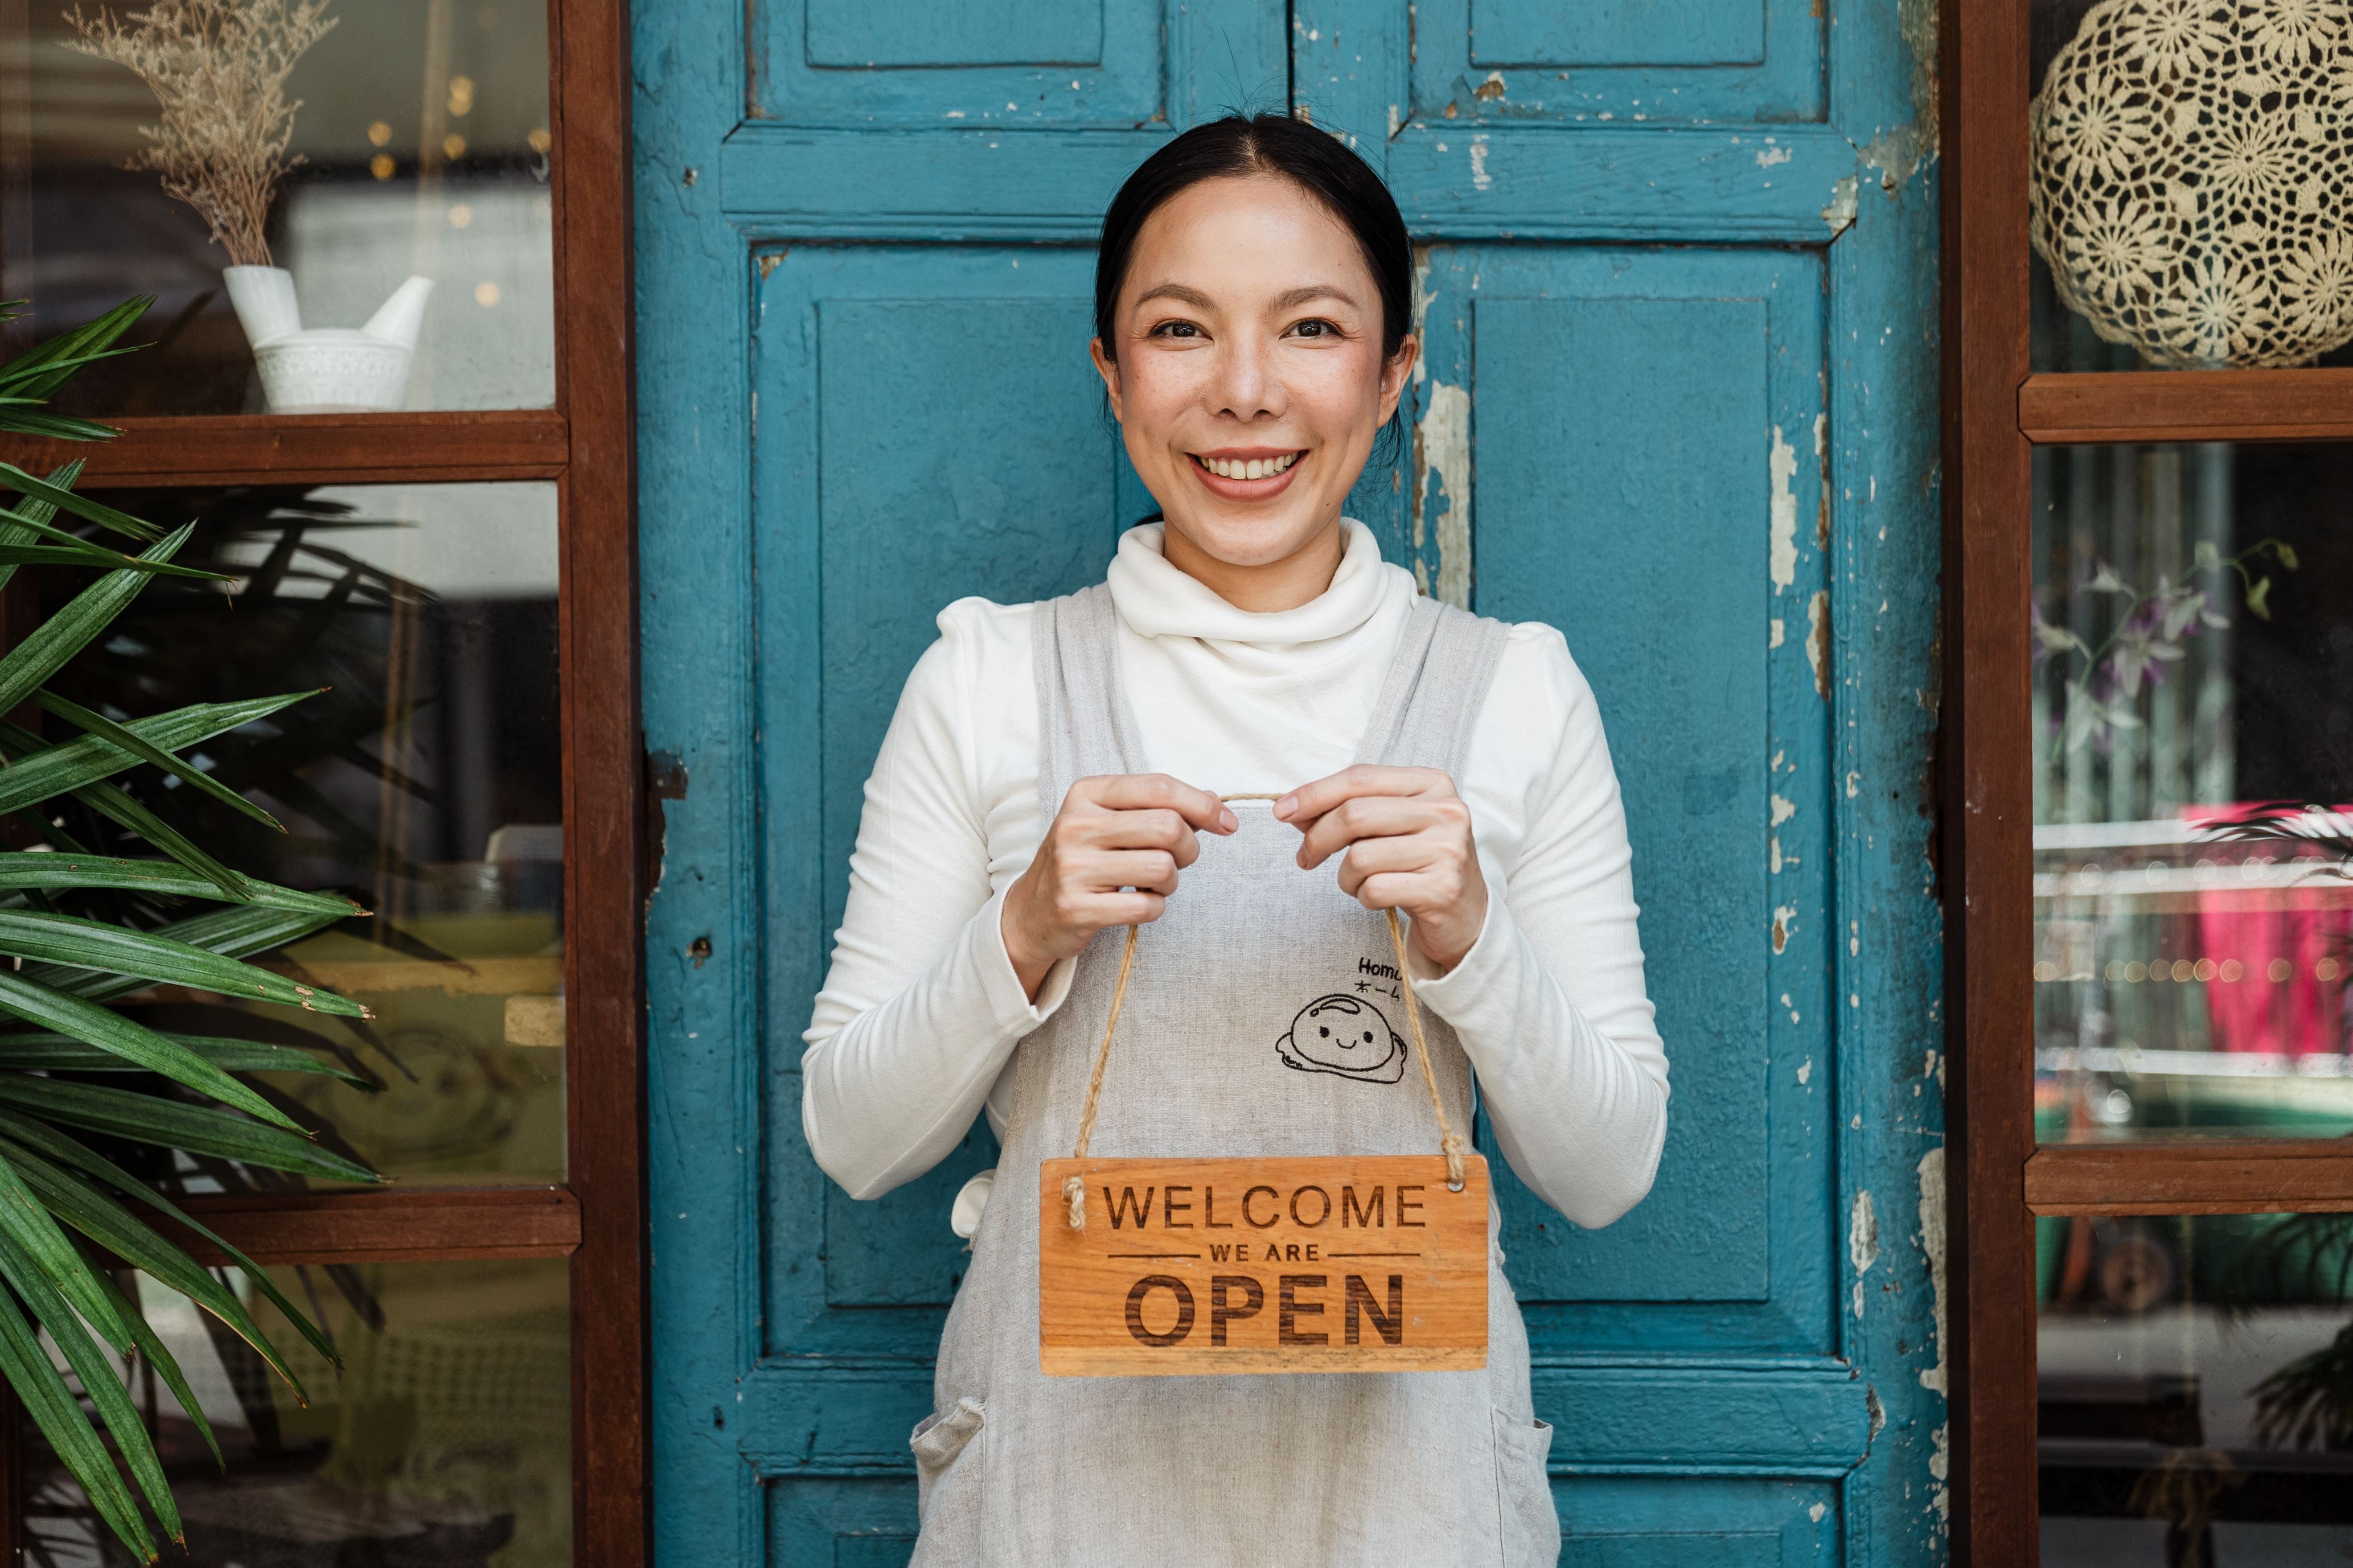 A lady business owner holding a welcome sign to her small business.